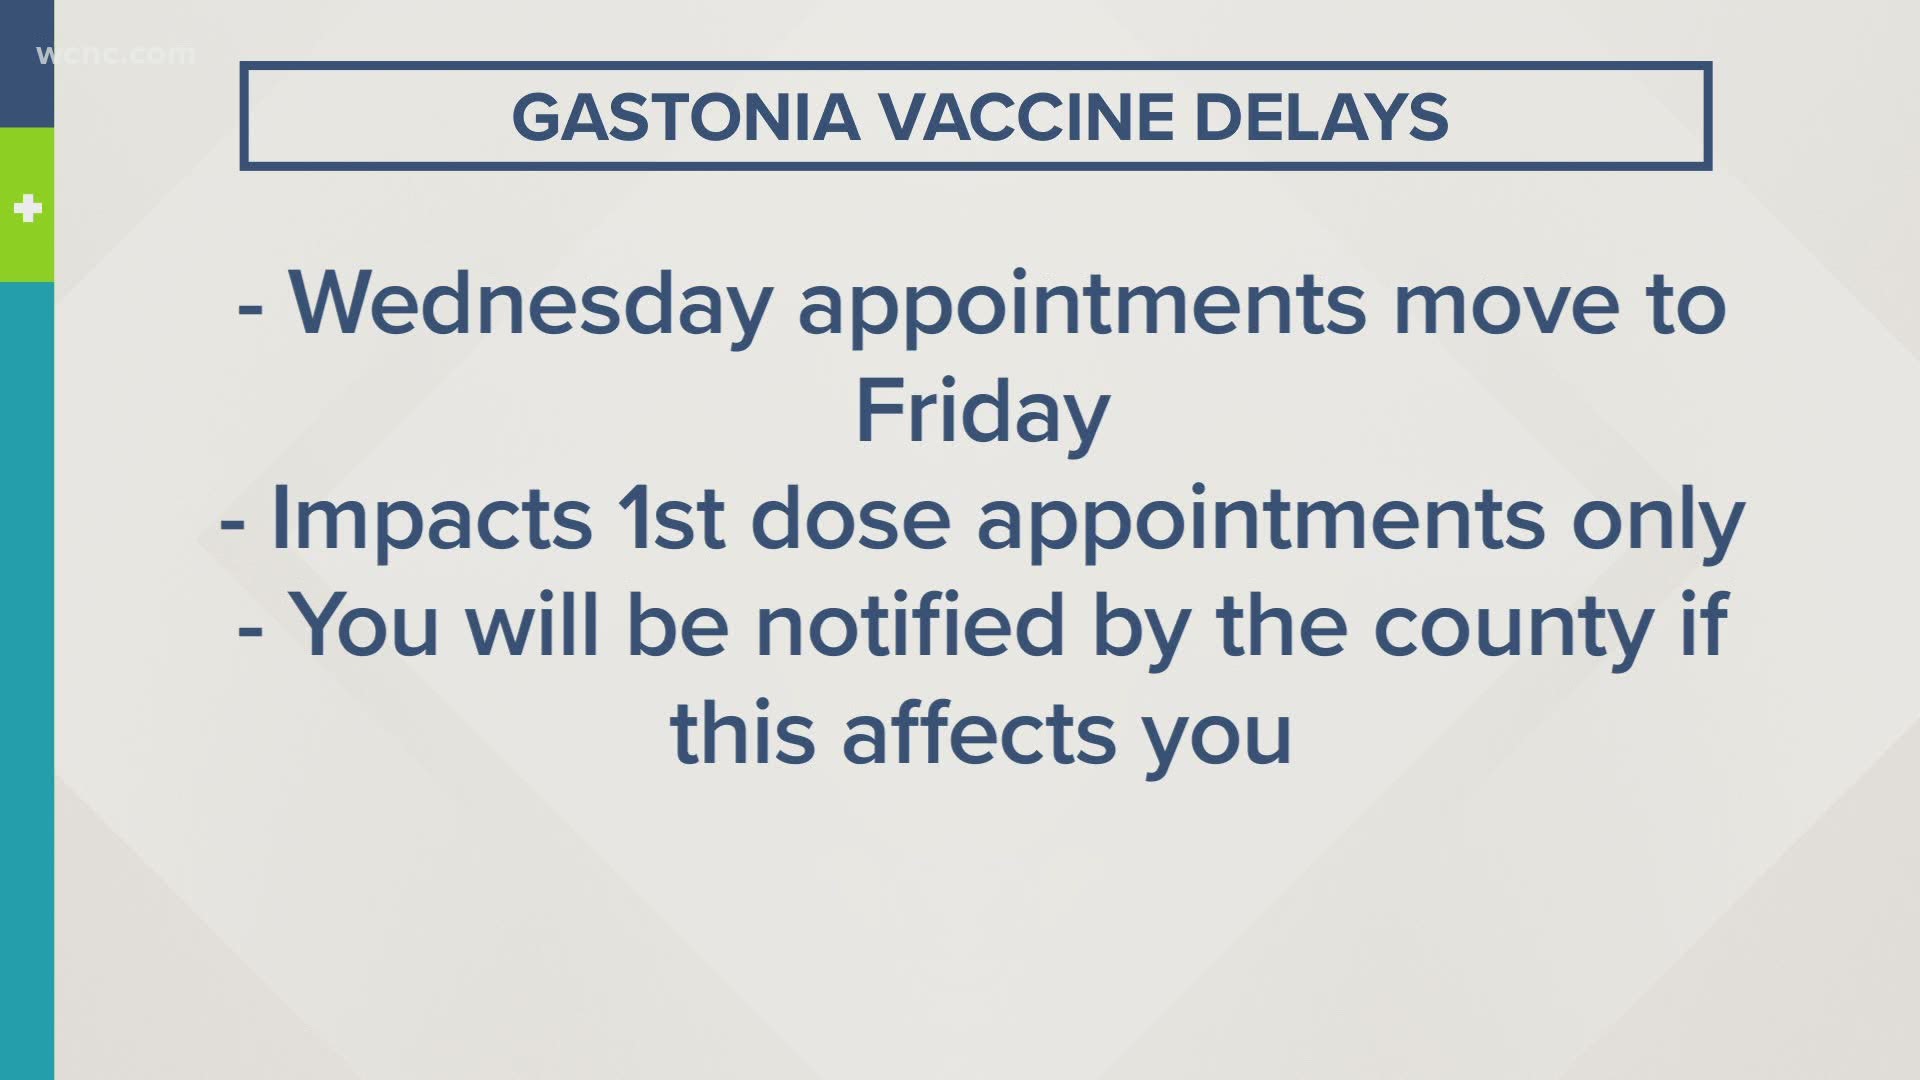 All 1,200 individuals scheduled to receive their first shots this Wednesday will be rescheduled for next Friday, Feb. 26.